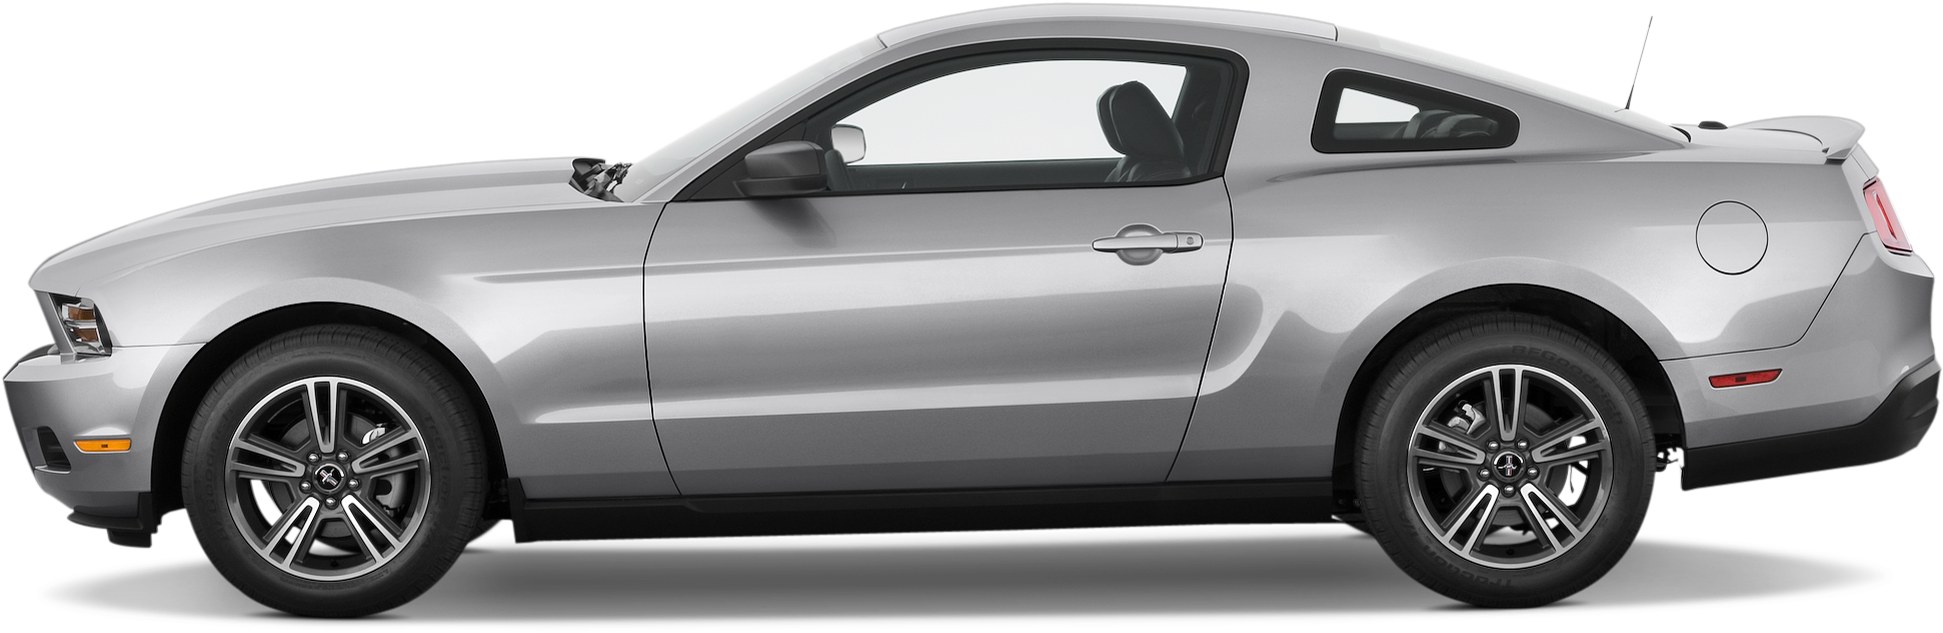 Silver Ford Mustang Side View PNG image